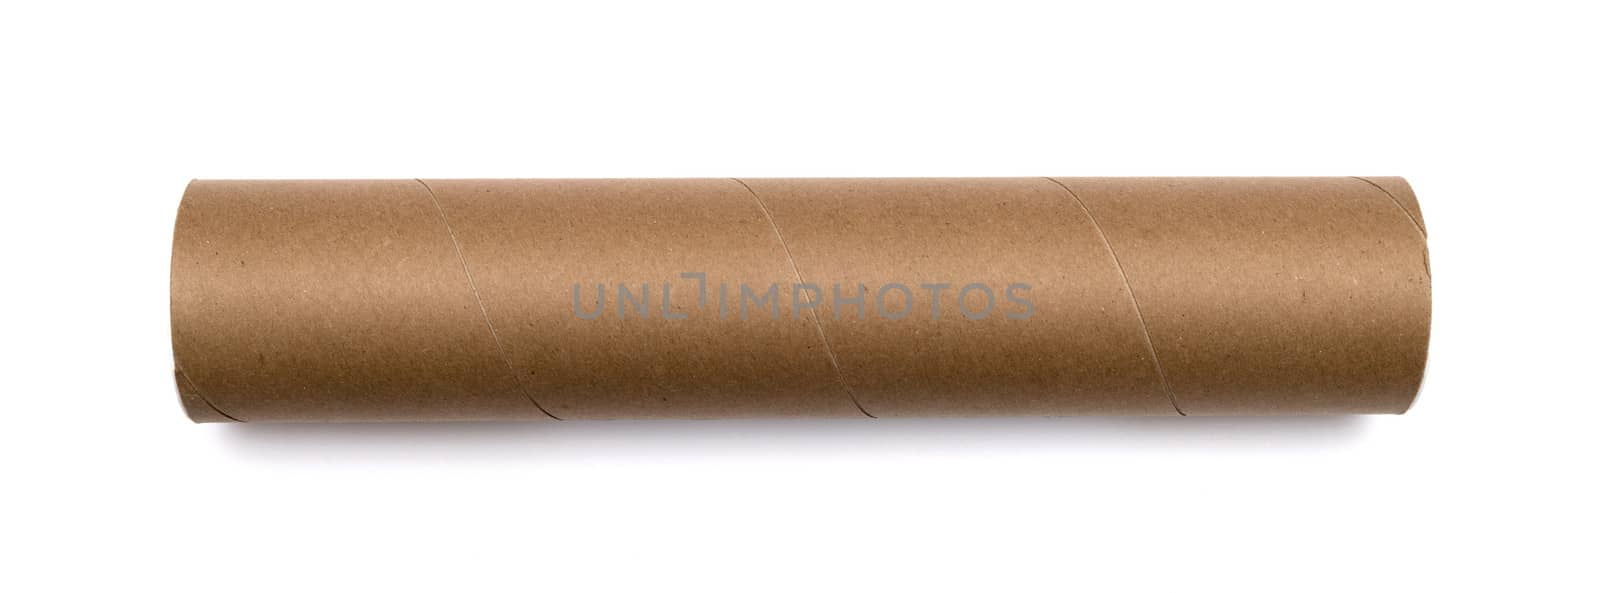 Cardboard tube isolated on white background by DNKSTUDIO